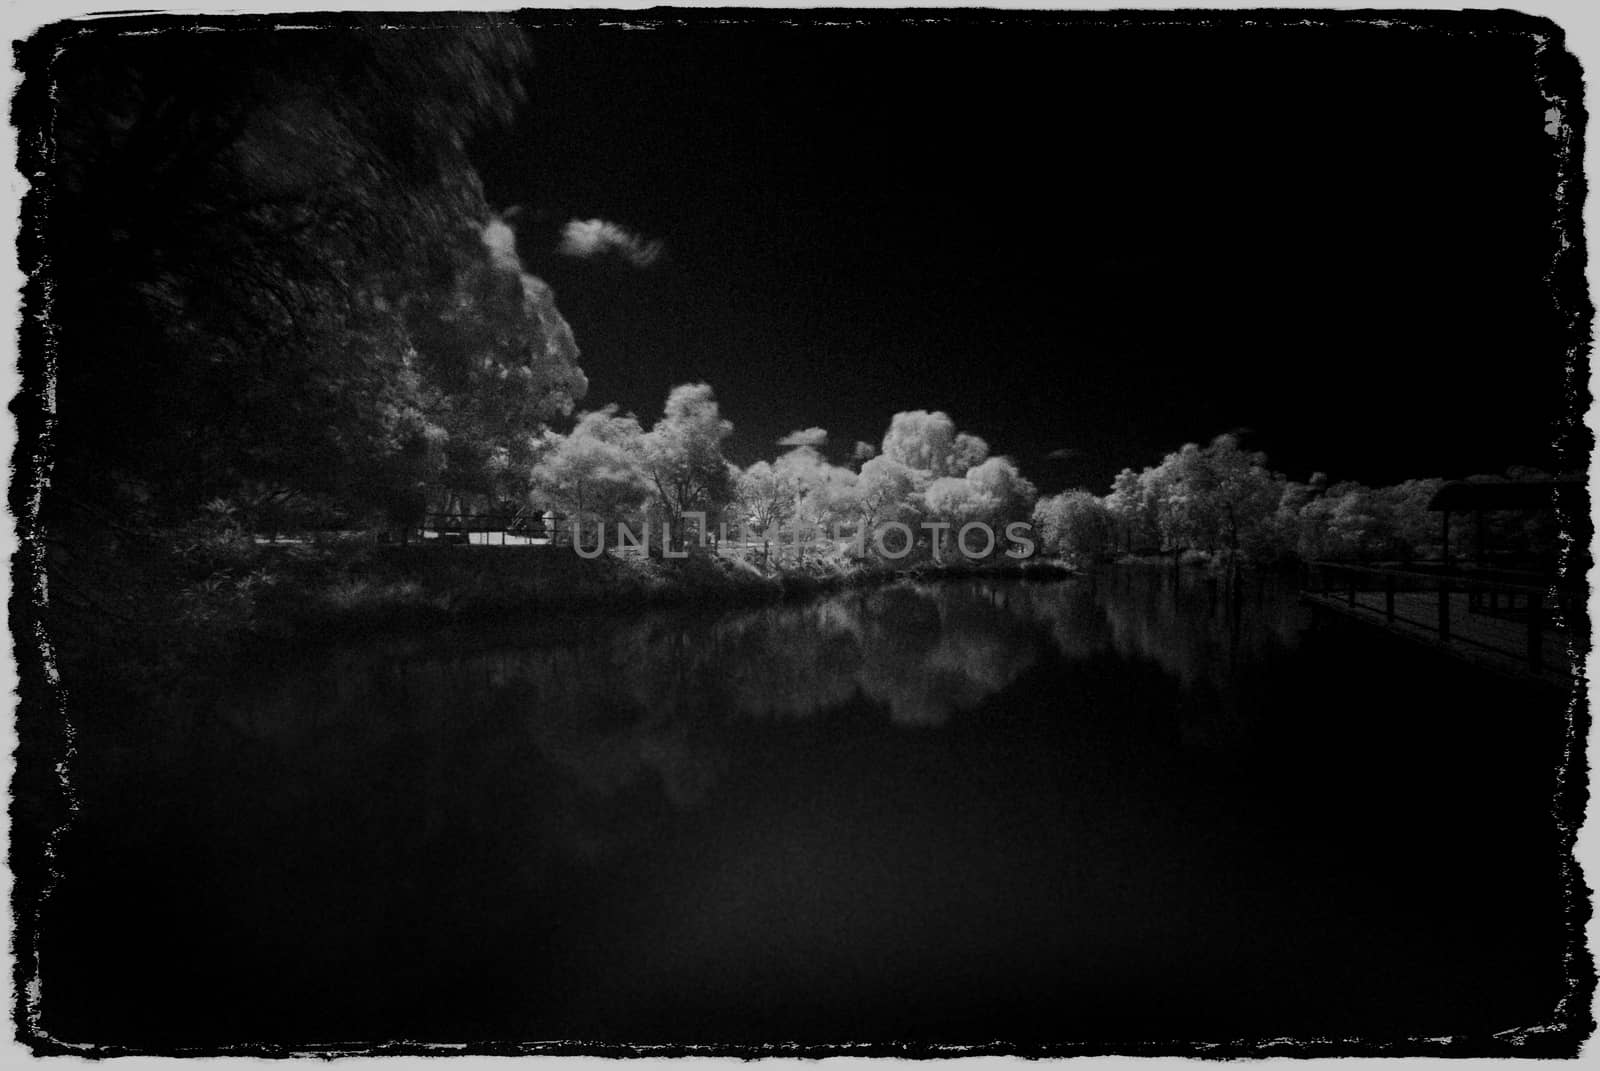 Reflections on the water shot in Infrared